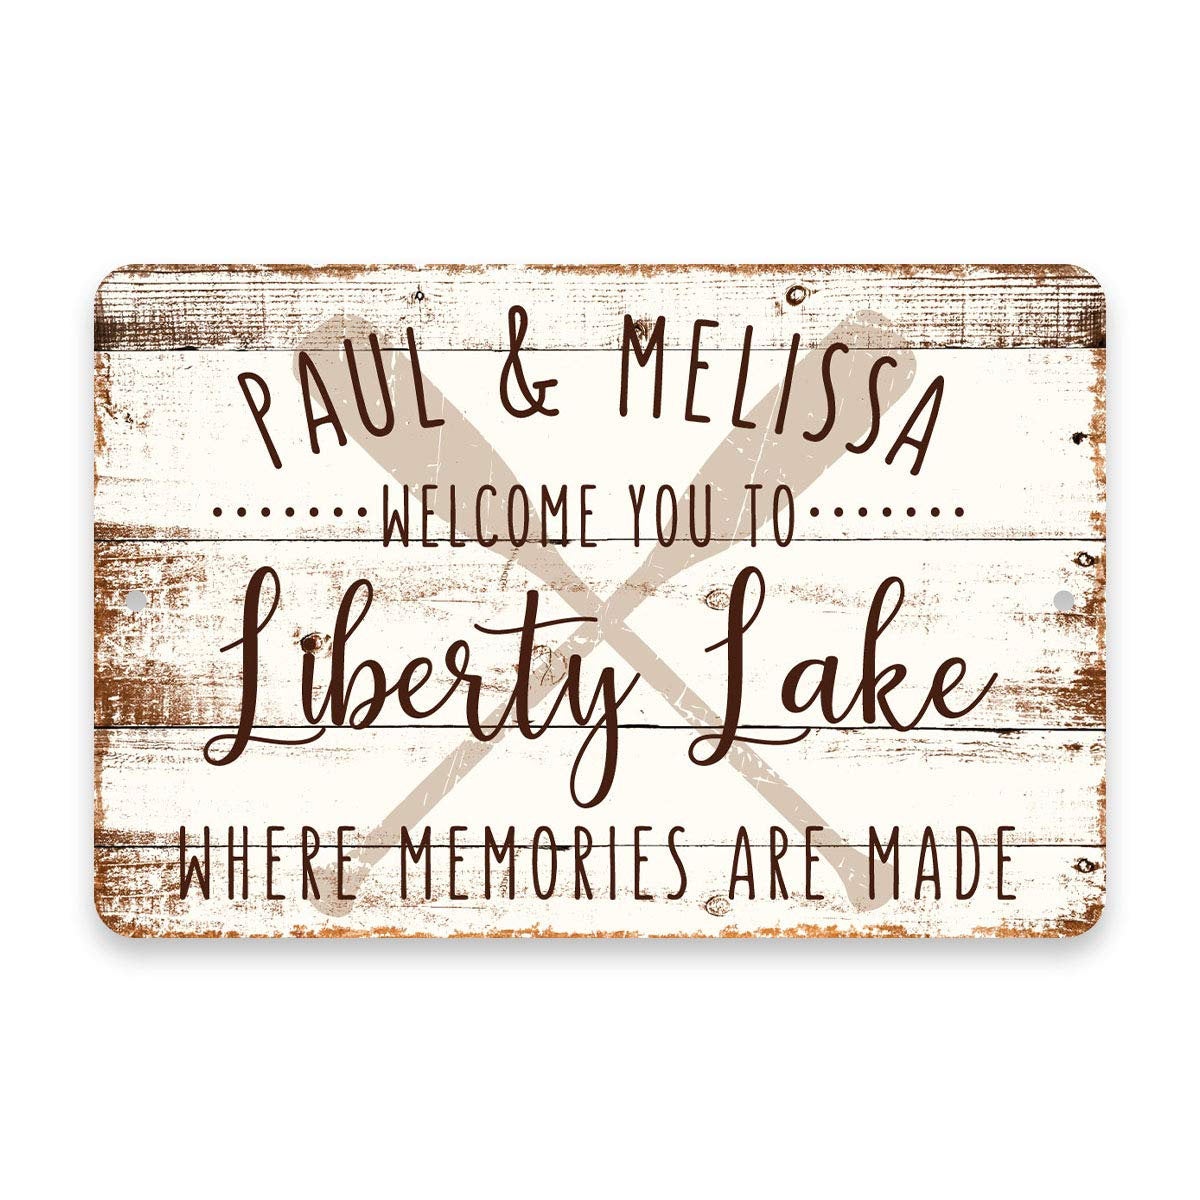 Personalized Welcome to Liberty Lake Where Memories are Made Sign - 8 X 12 Metal Sign with Wood Look